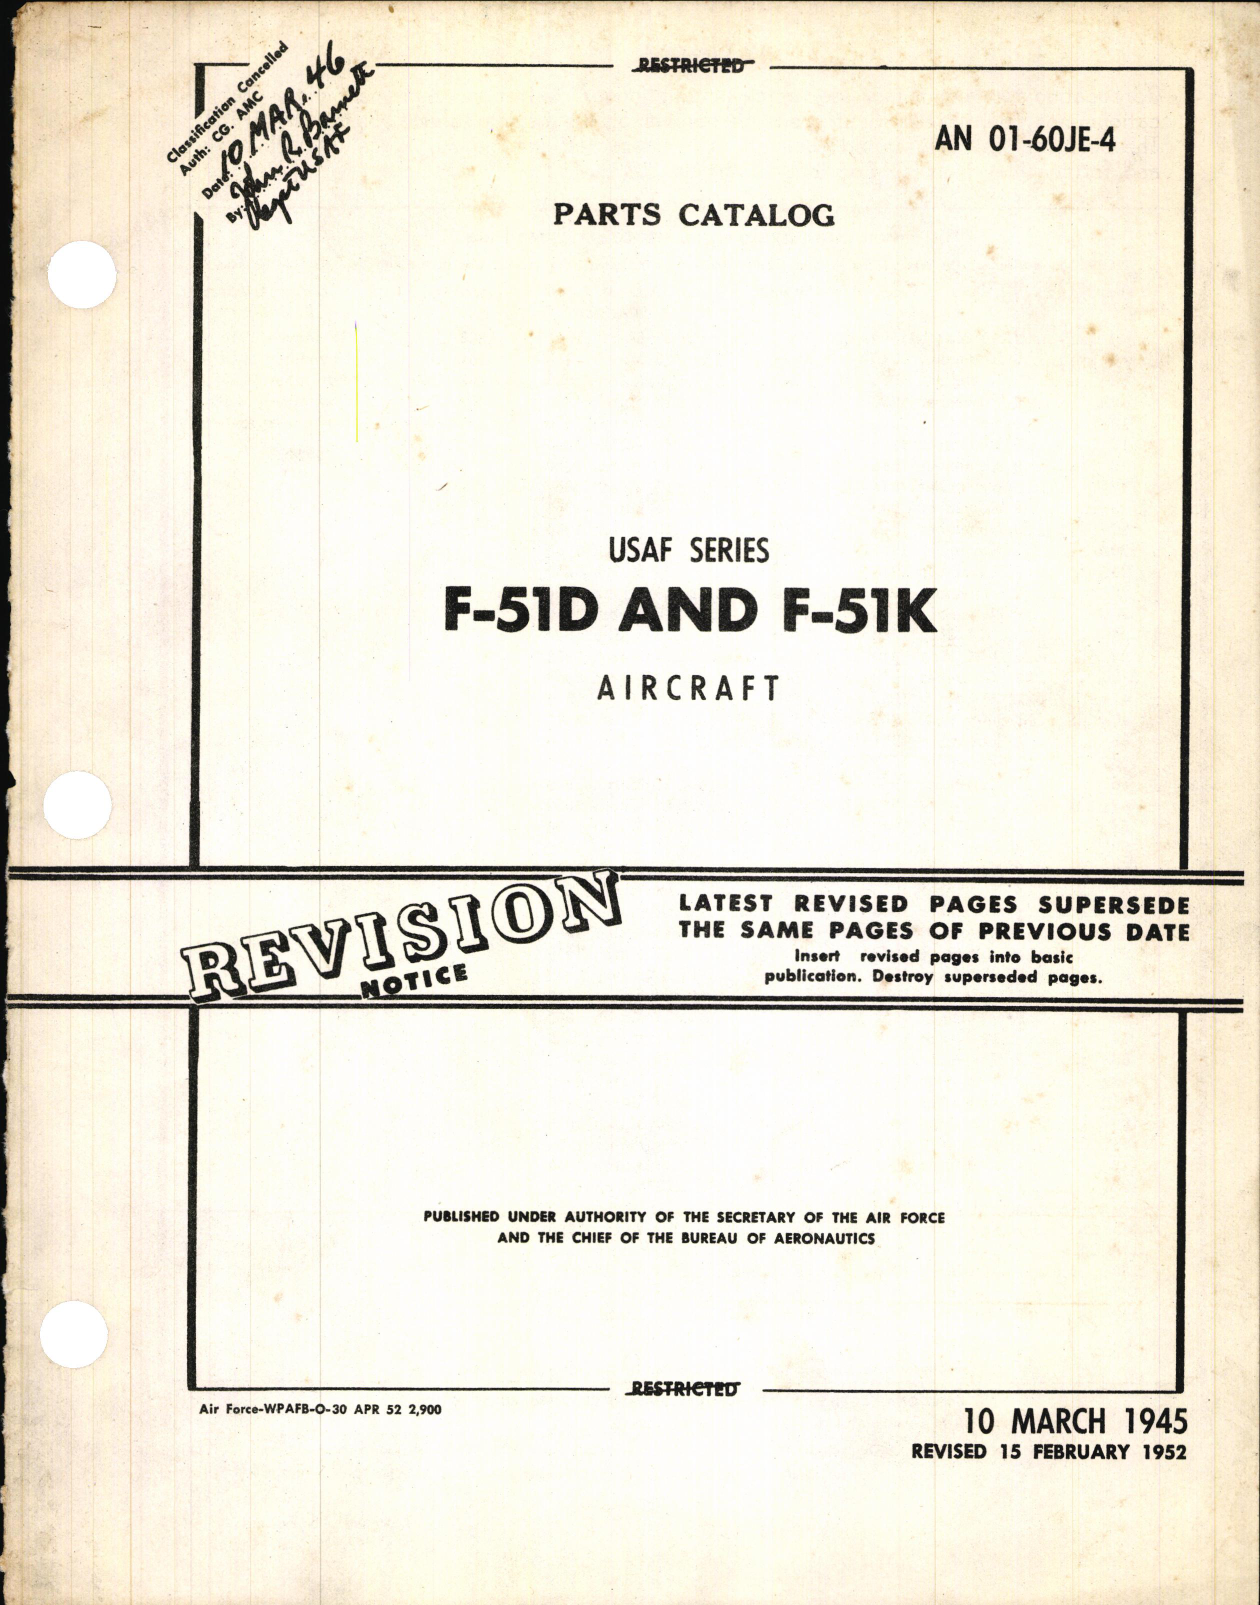 Sample page 1 from AirCorps Library document: Parts Catalog for F-51D and F-51K